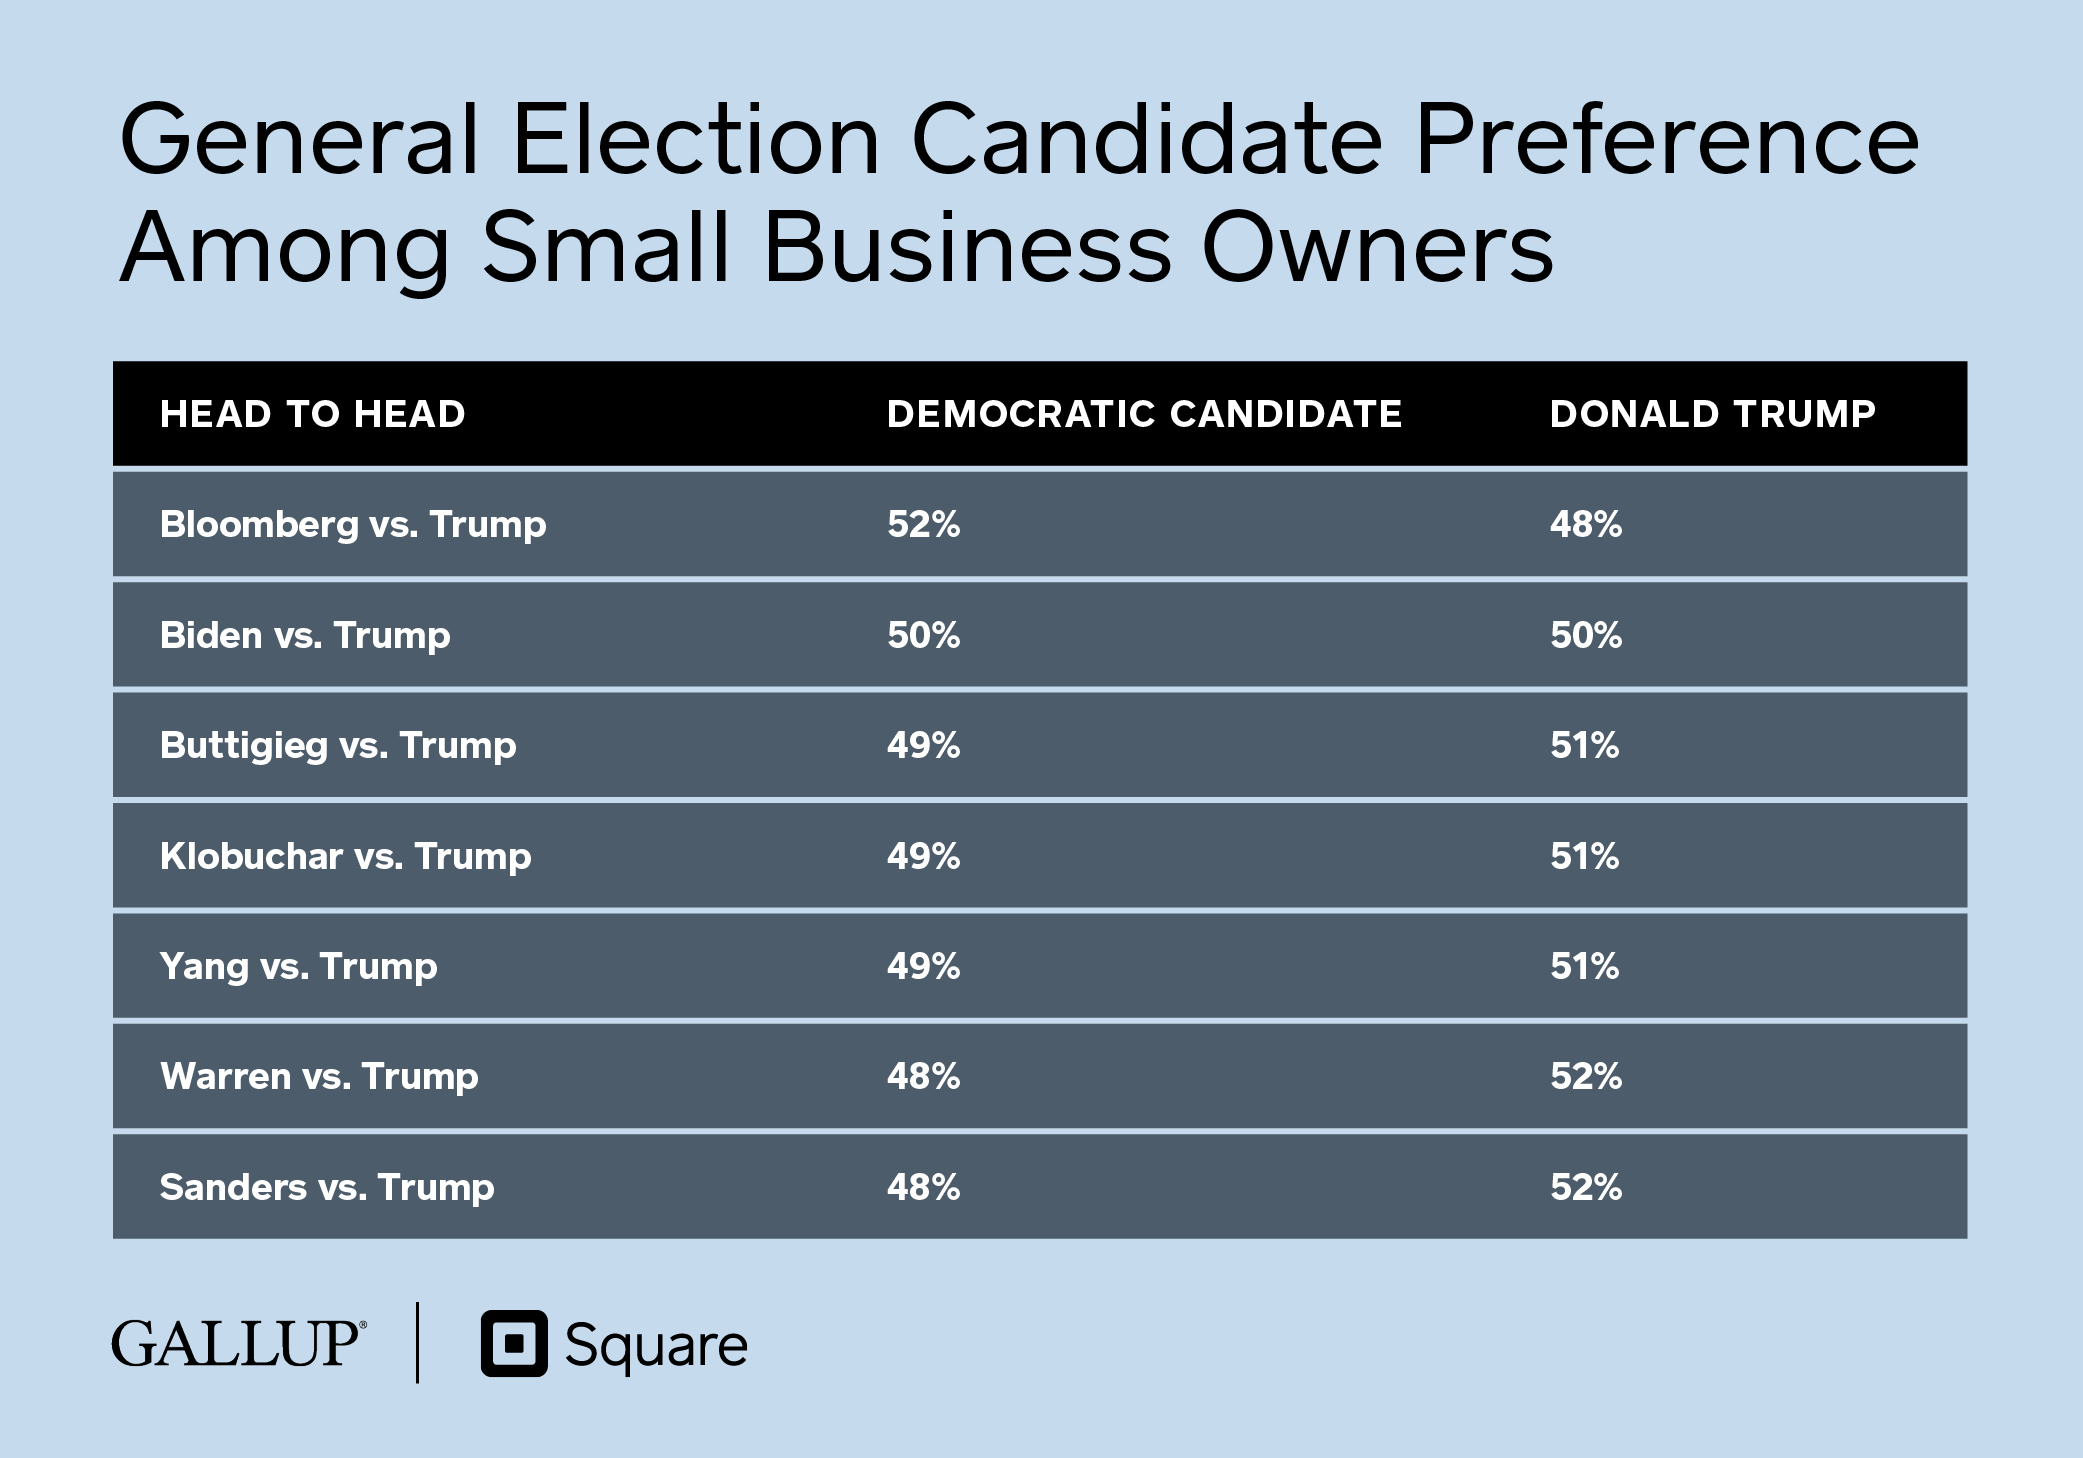 General Election Candidate Preference Among Small Business Owners